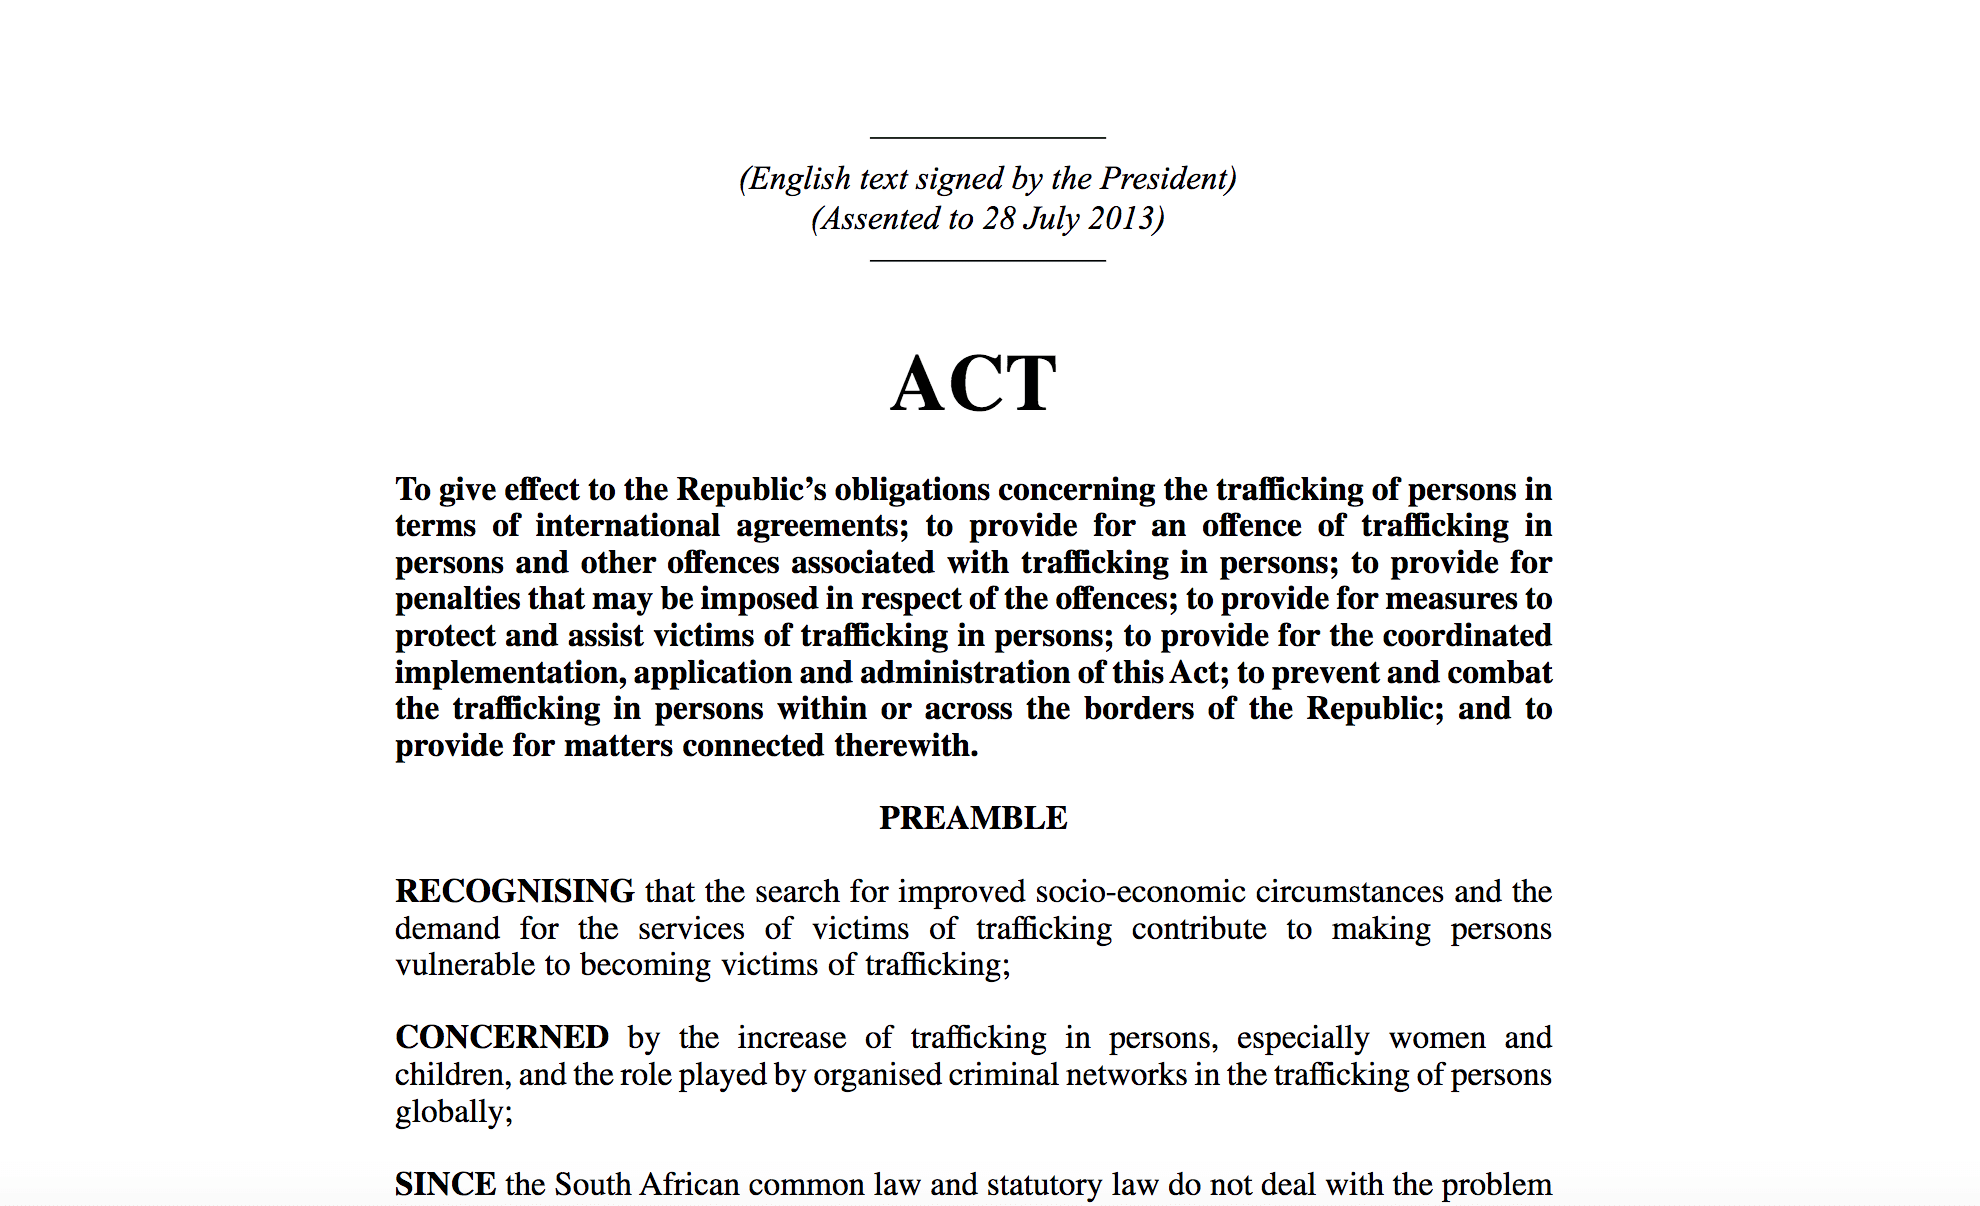 South Africa’s “Act No. 7 of 2013: Prevention and Combating of Trafficking in Persons Act”